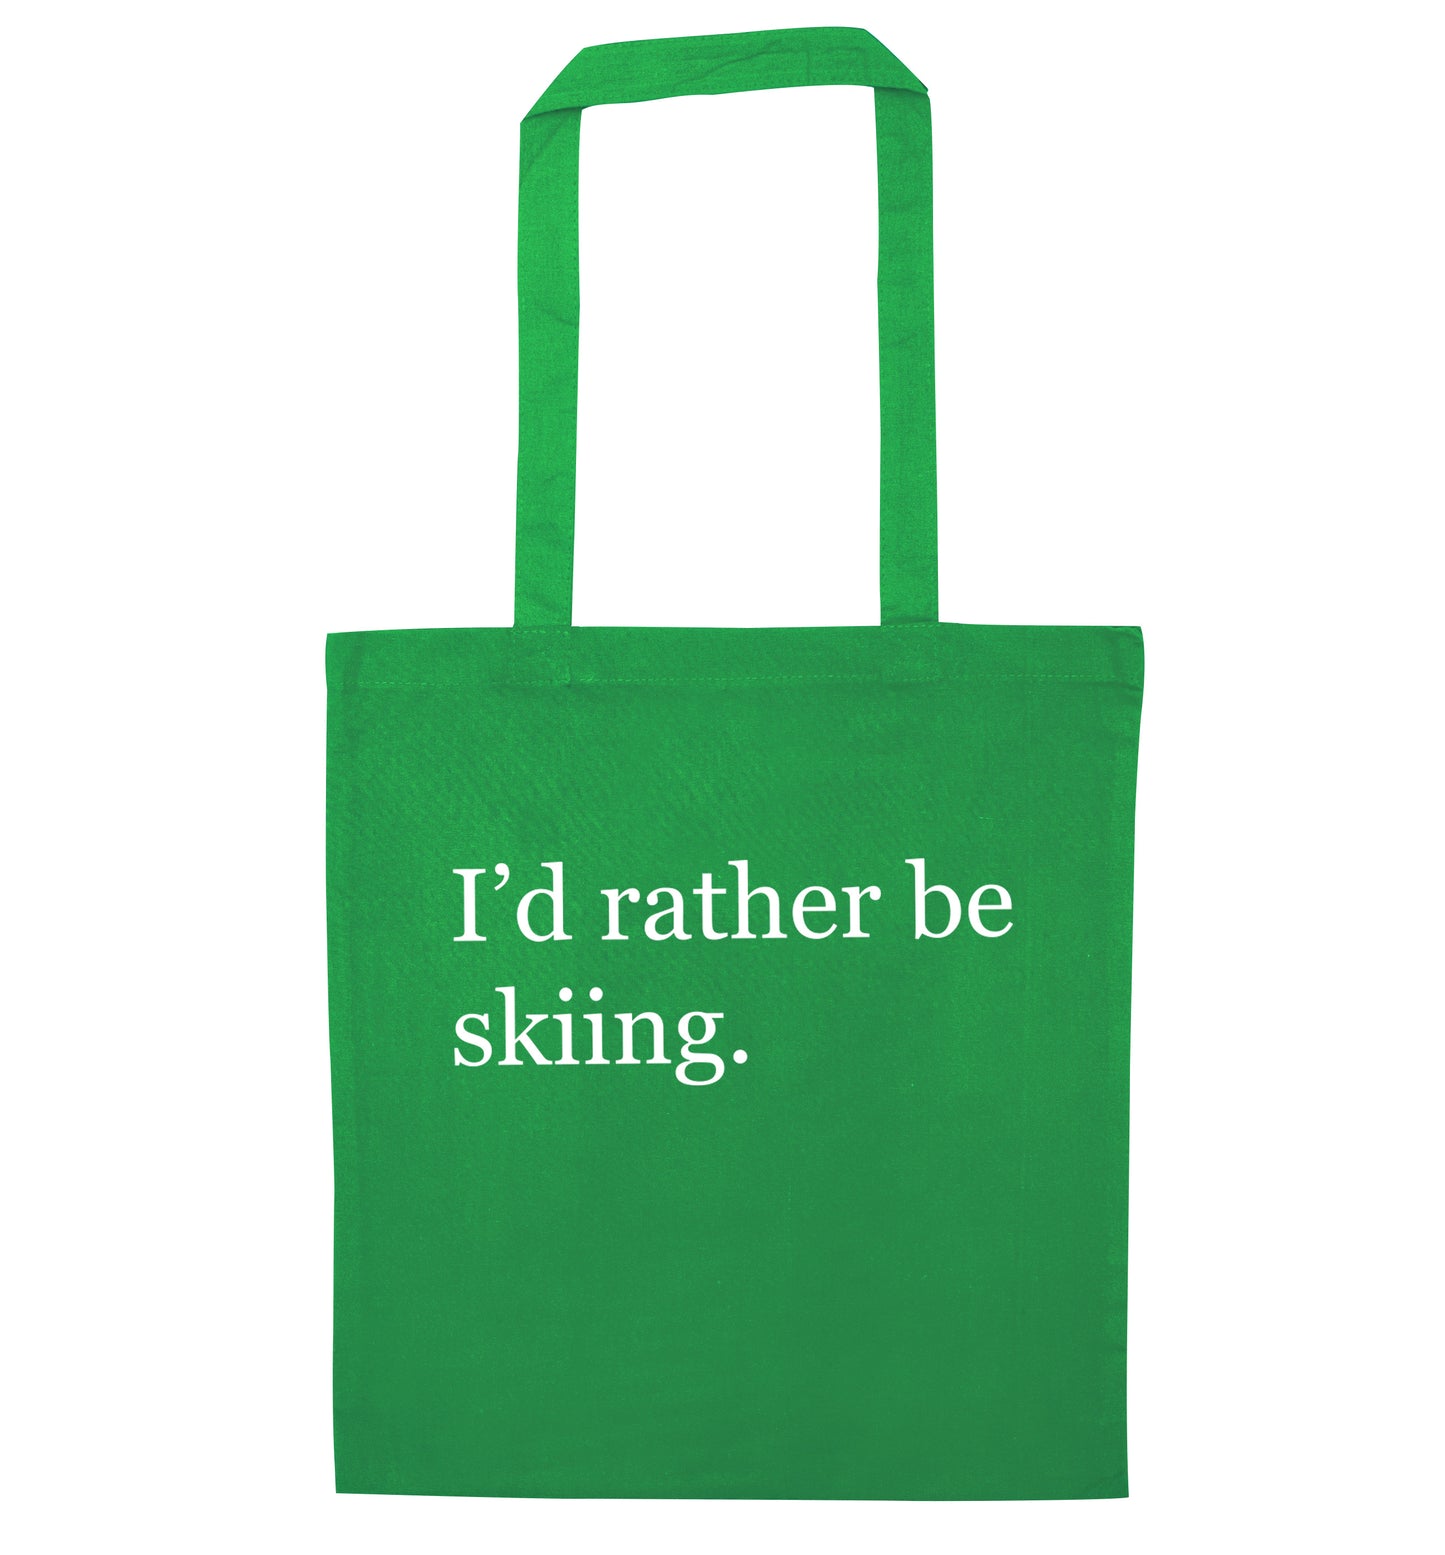 I'd rather be skiing green tote bag